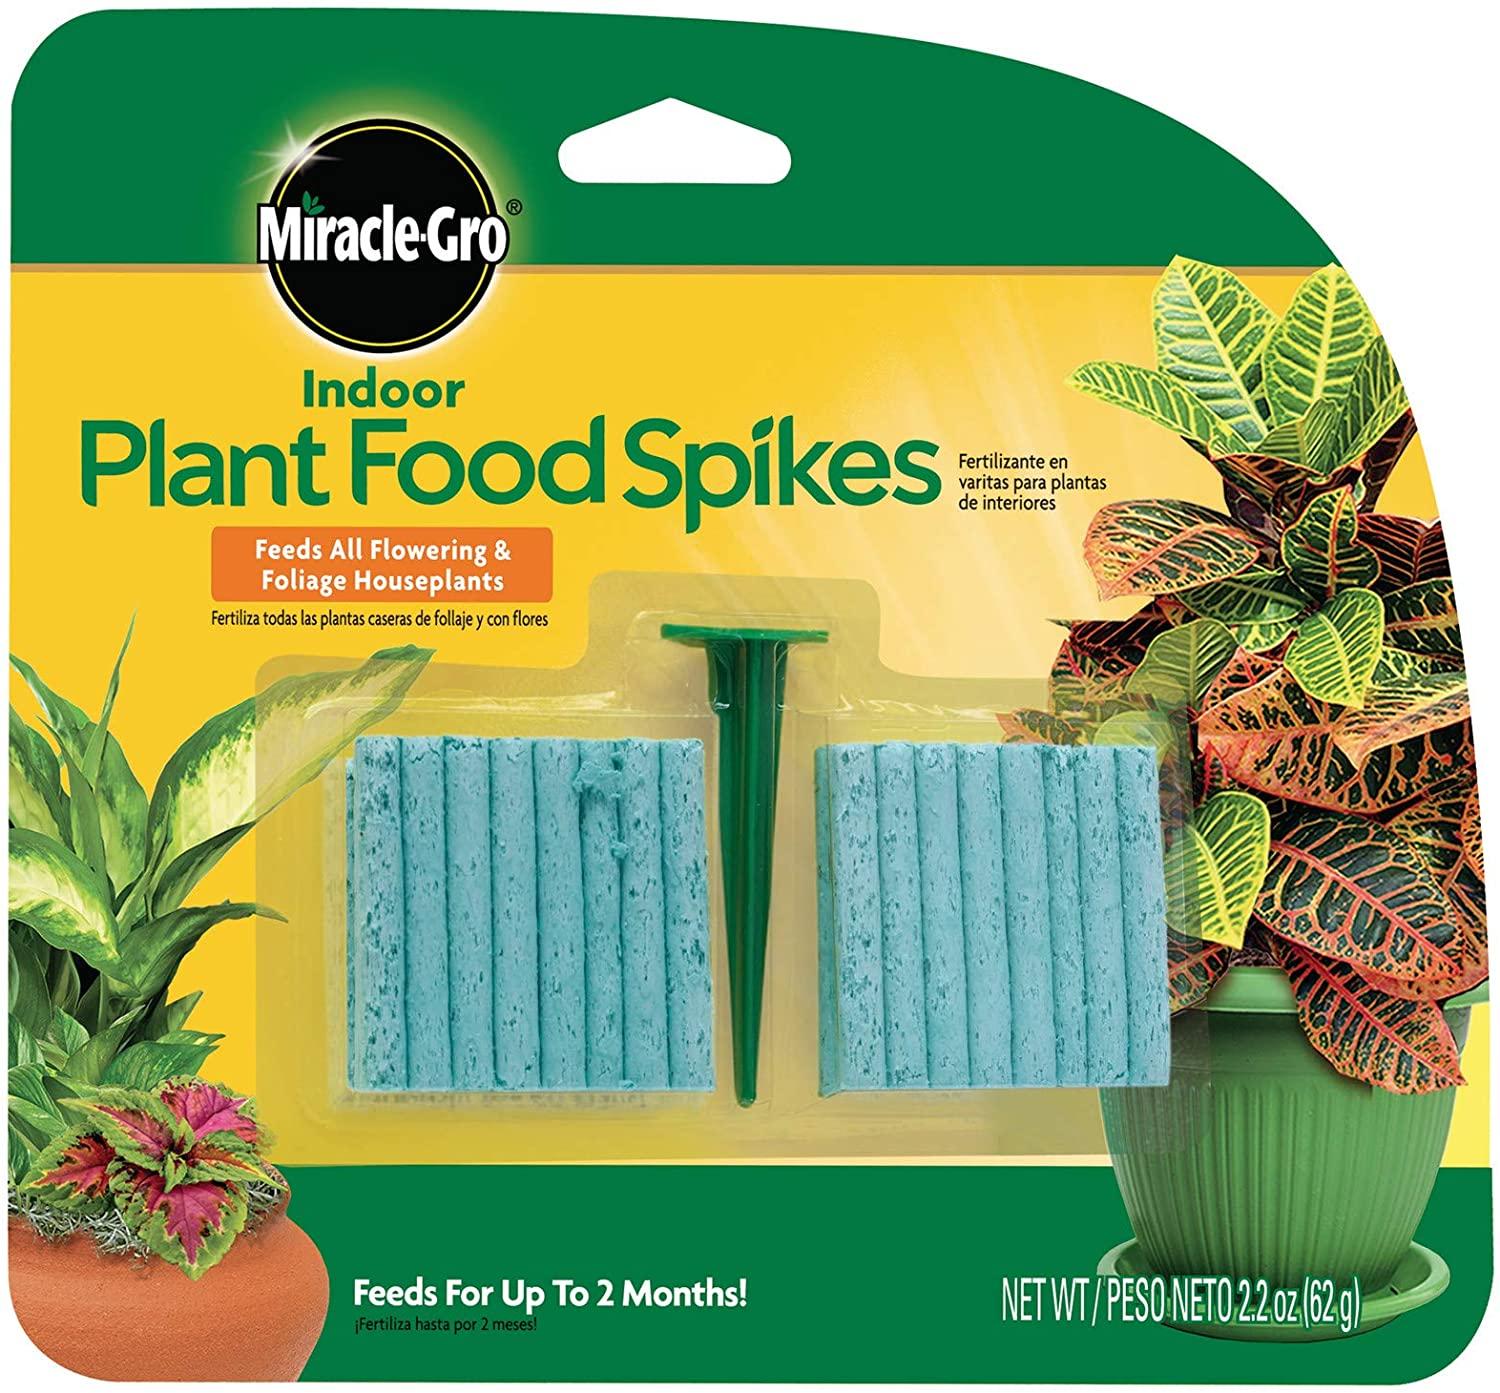 Miracle-Gro Indoor Plant Food Spikes for $20.69